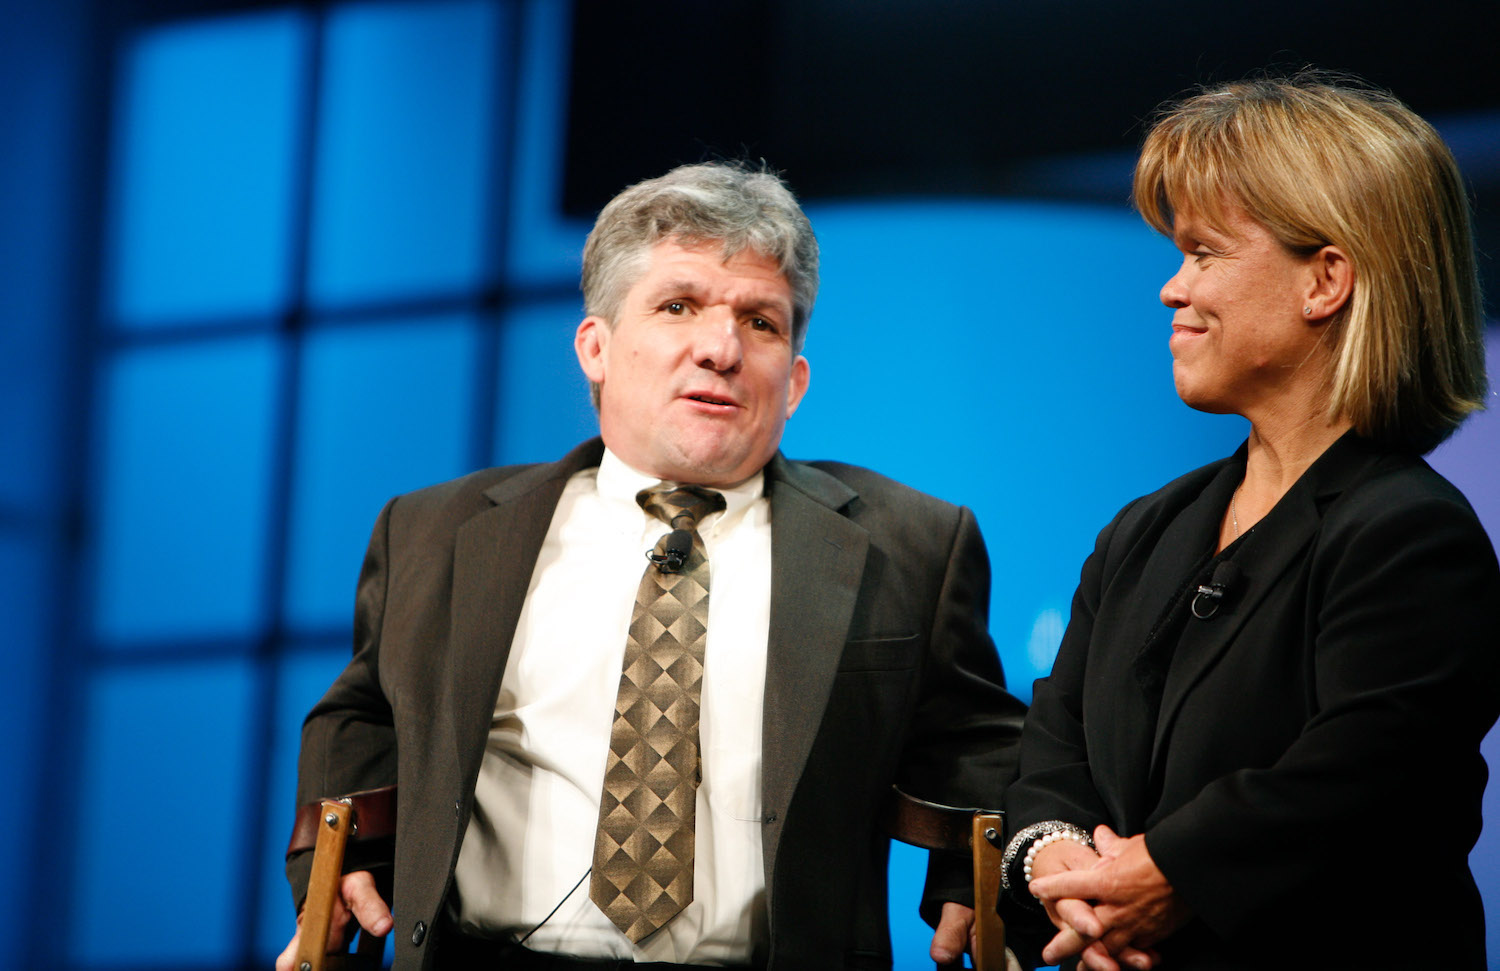 'Little People, Big World' stars Matt Roloff and Amy Roloff against a blue background speaking at a conferenc